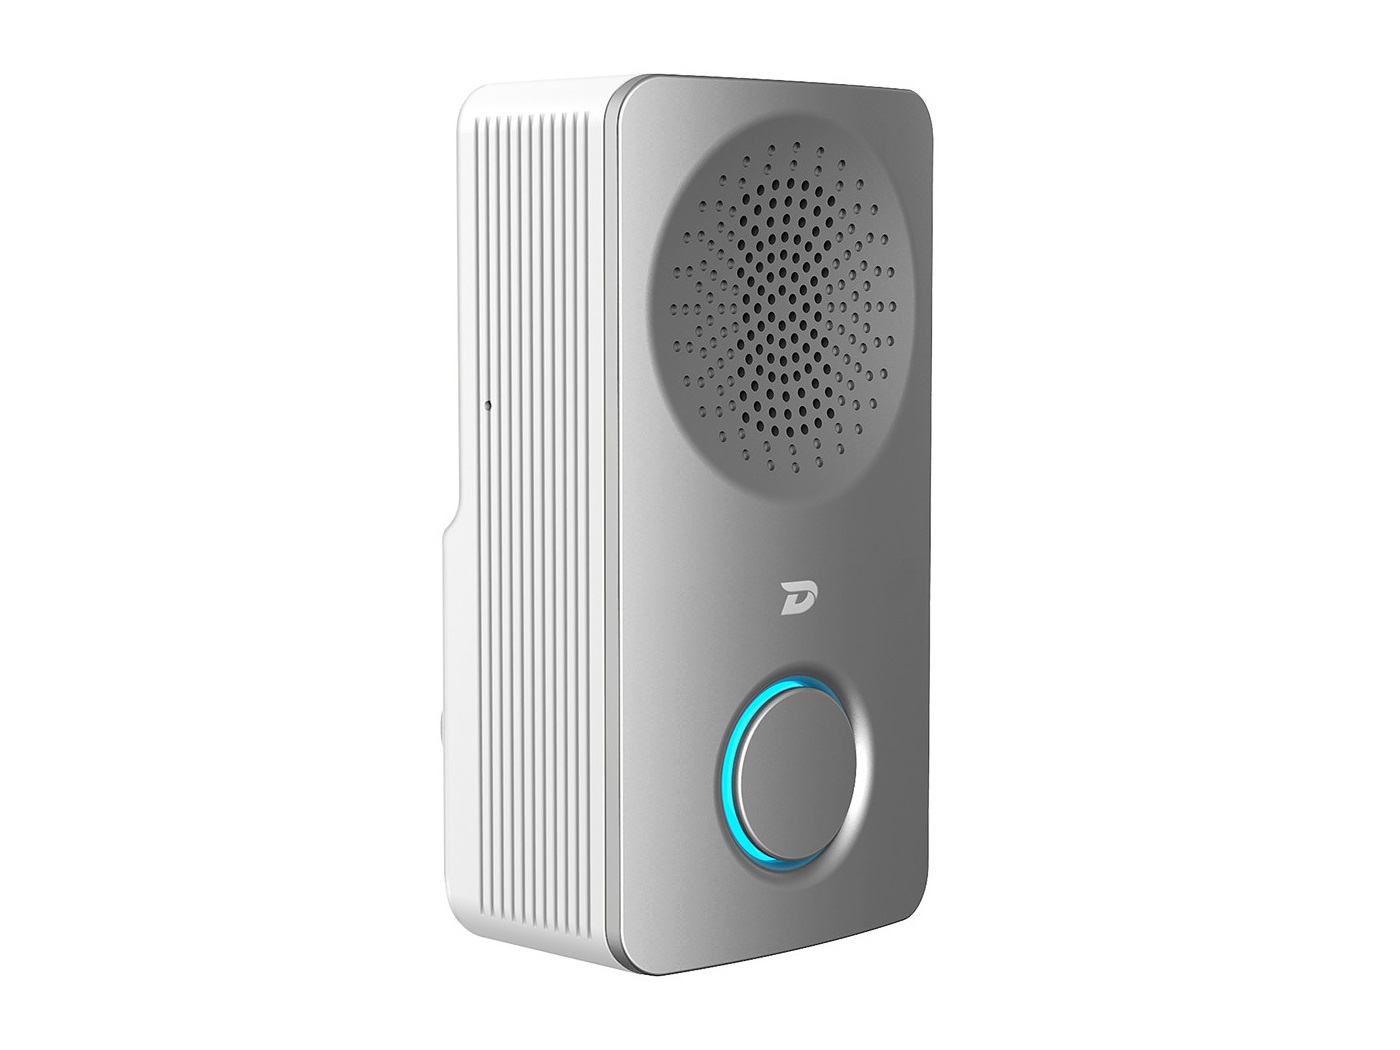 ICRealtime Singer Wireless Door Chime For DINGER With Multiple Ringtones Options